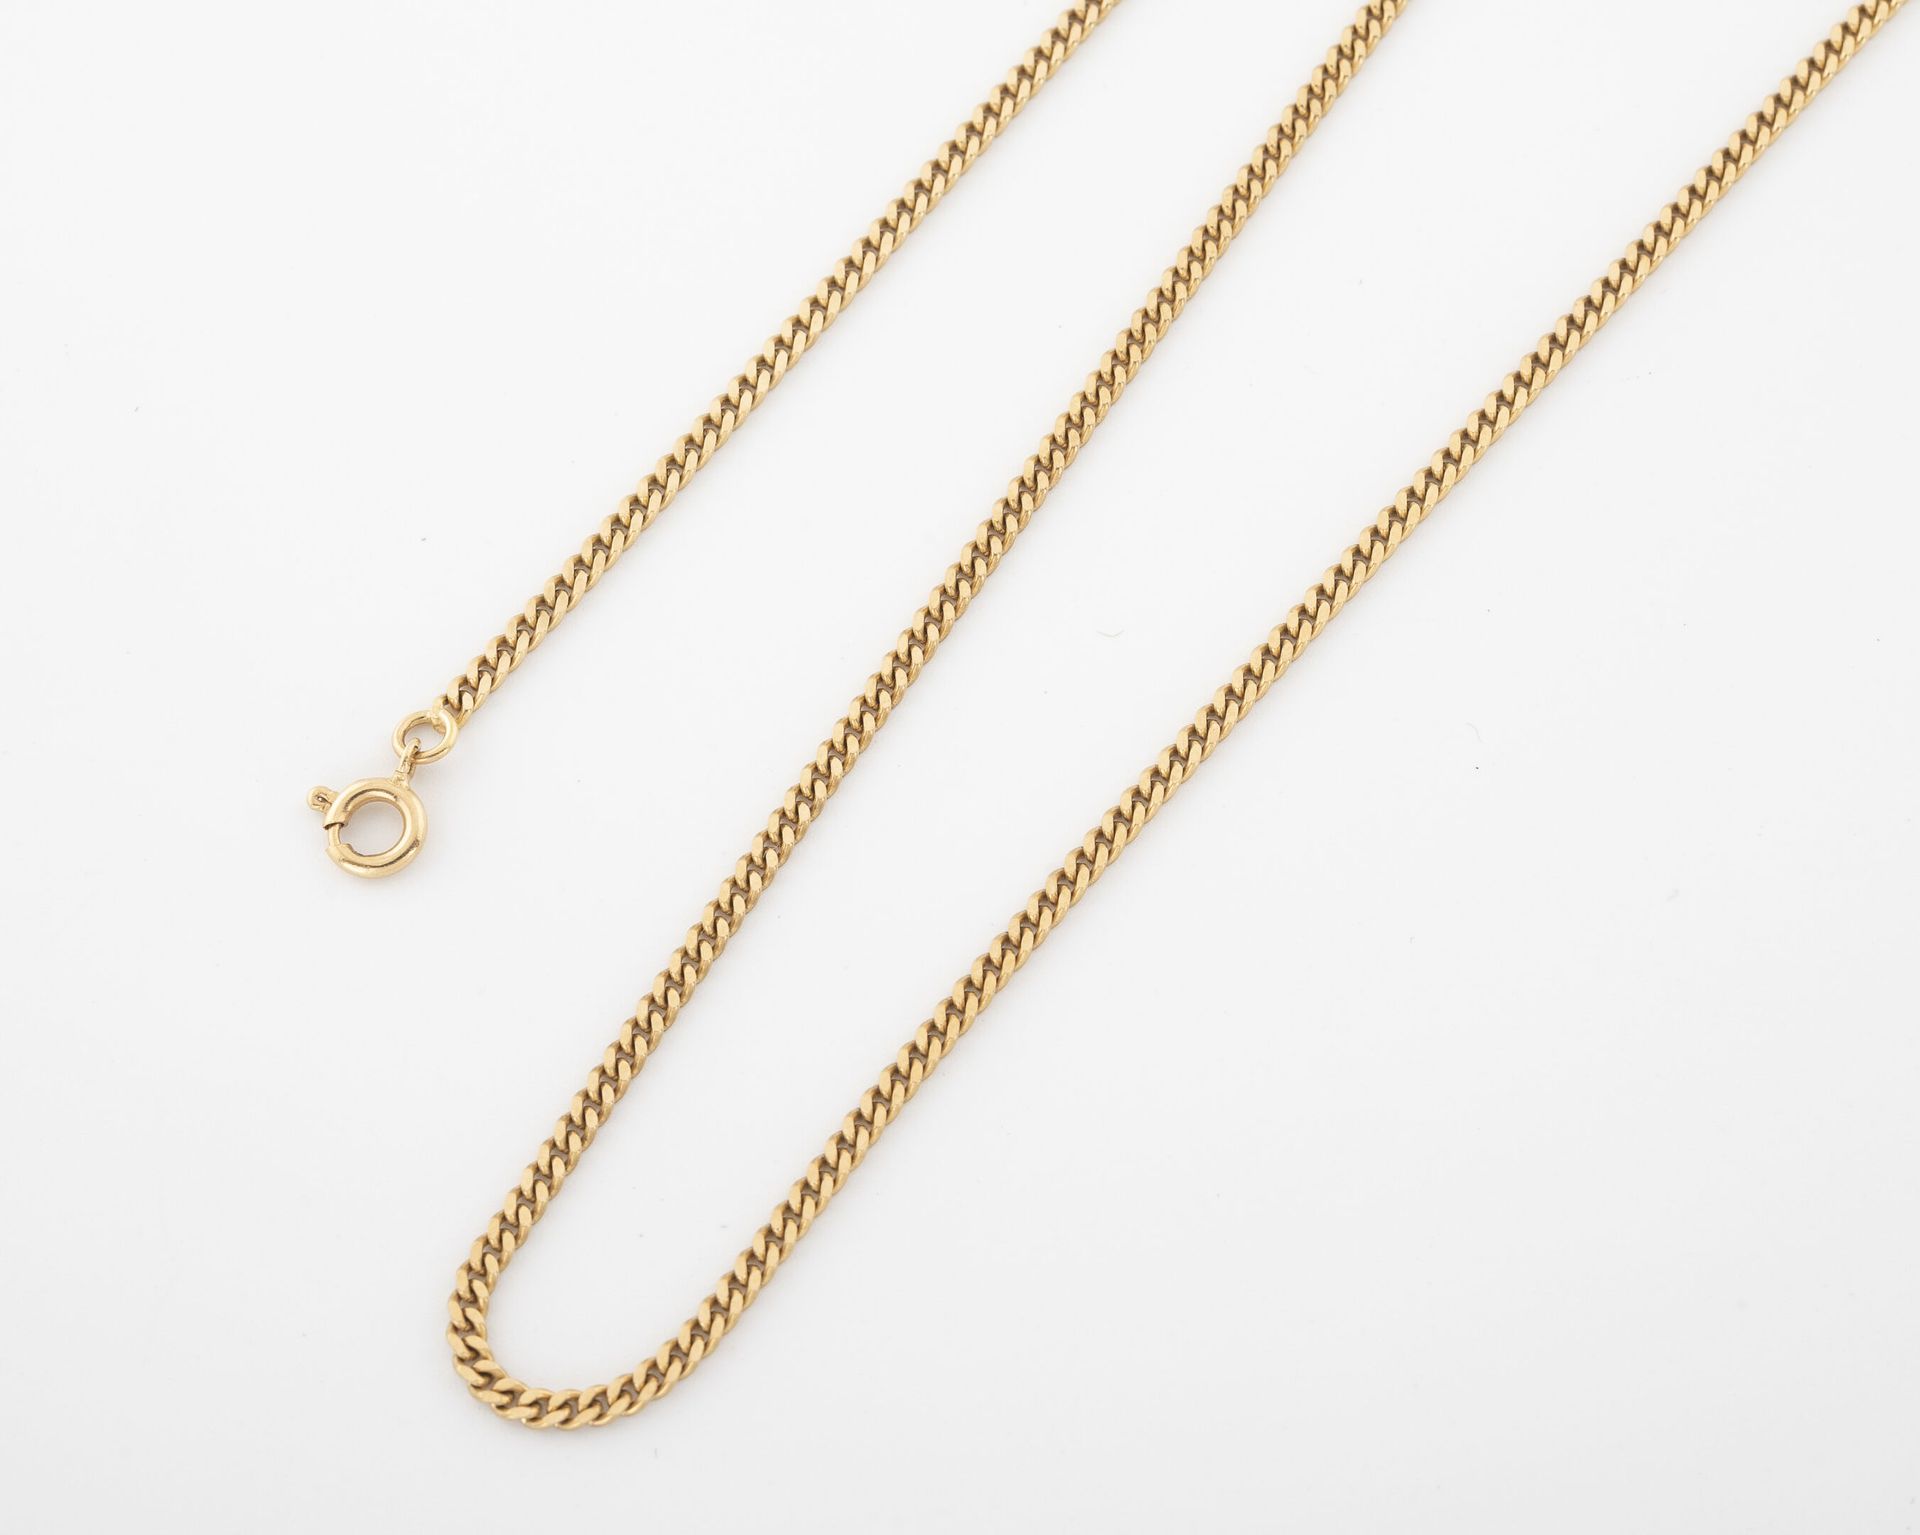 Null 
Yellow gold (750) necklace with filed curb chain. 

Spring ring clasp.

We&hellip;